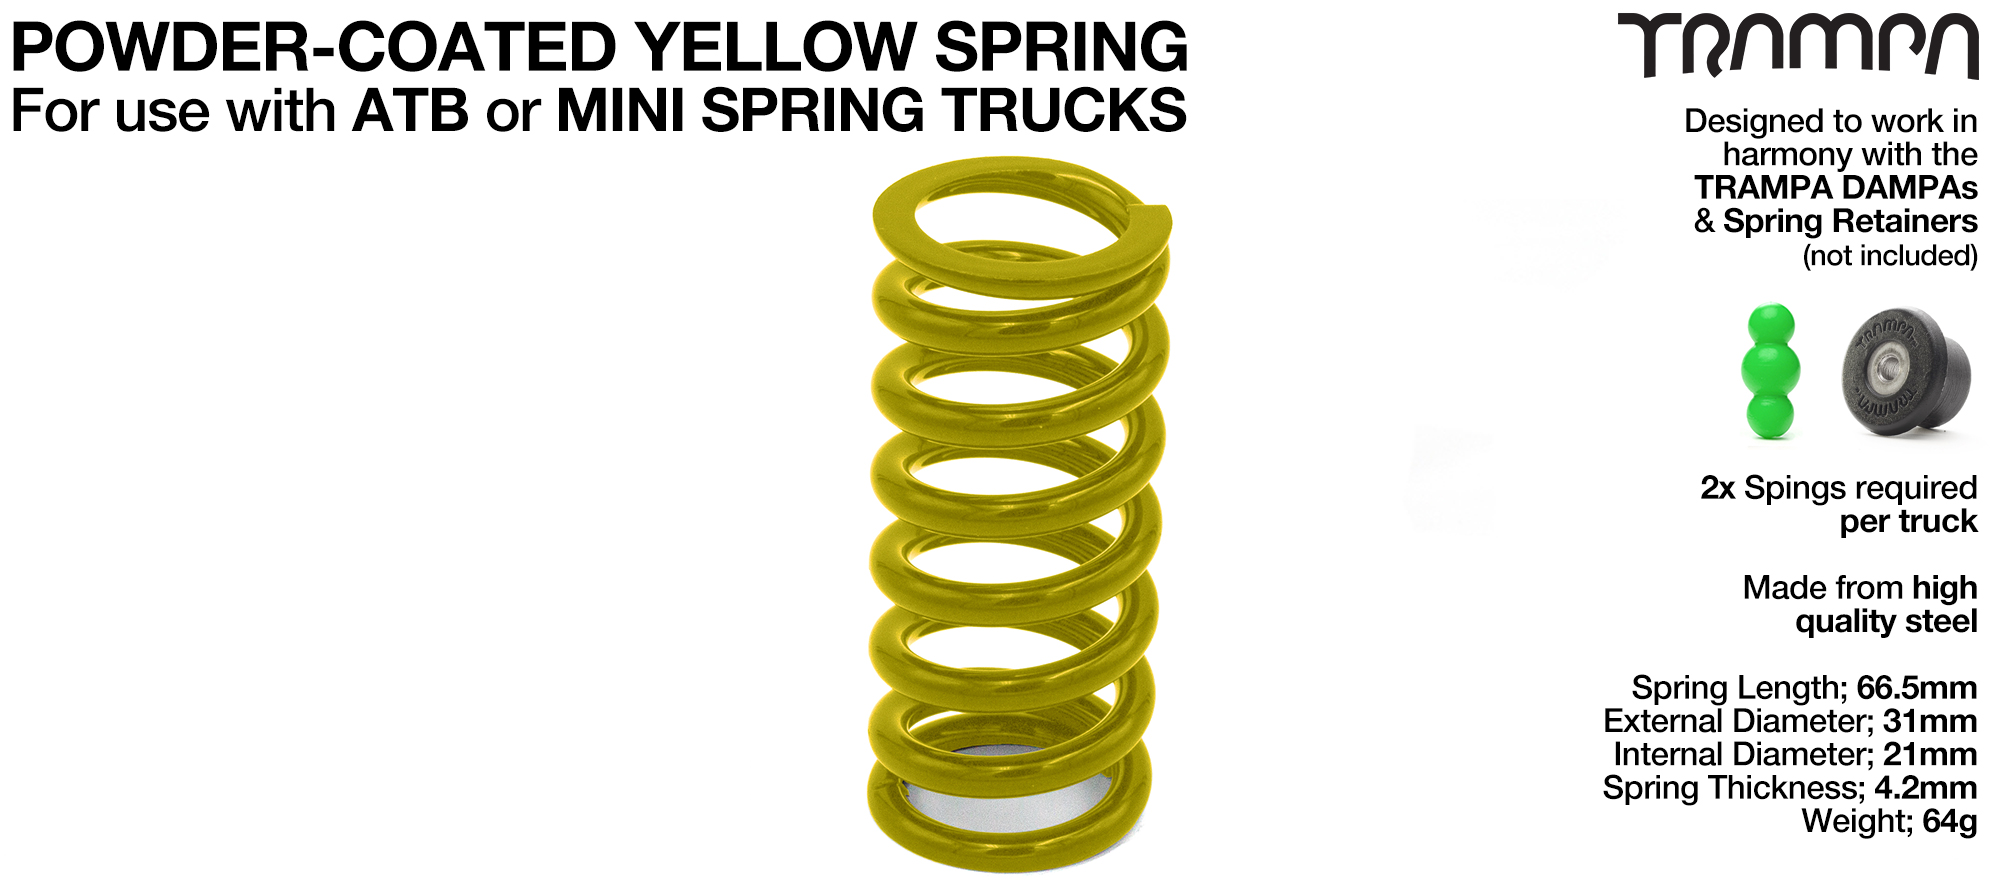 Steel Spring Powder Coated - YELLOW